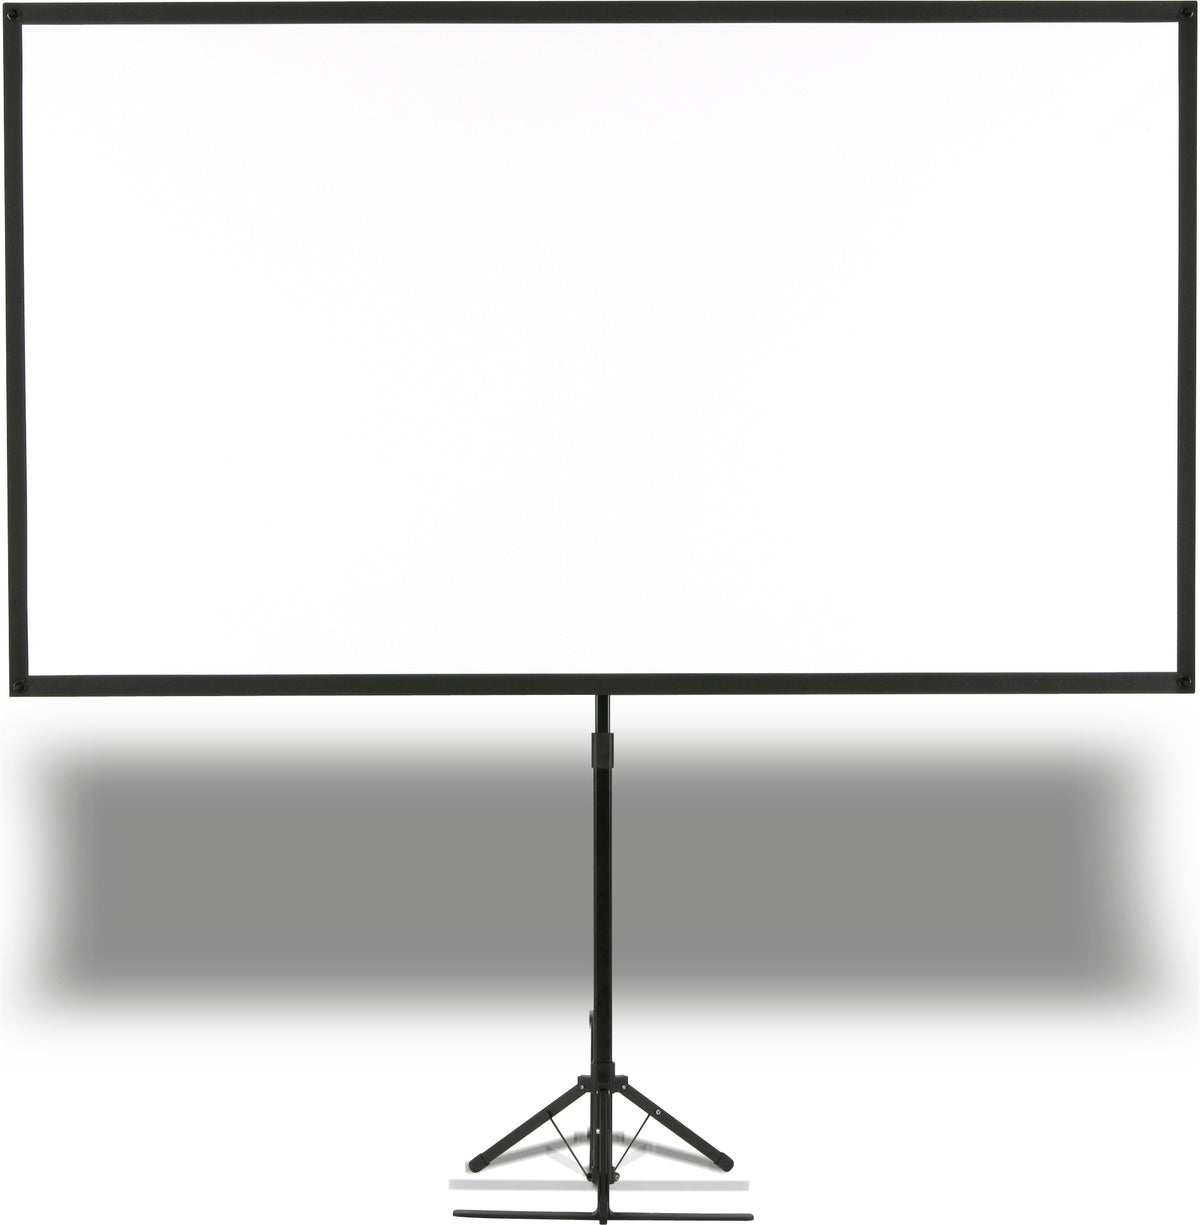 Epson ELPSC21 - Projection Screen with Tripod - 80" (203 cm) - 16:9 - for Epson EB-1771, 1775, 1776, 2042, 93, S02, S92, W06, X11, EH-TW5200, TW5705, TW5820, TW5825